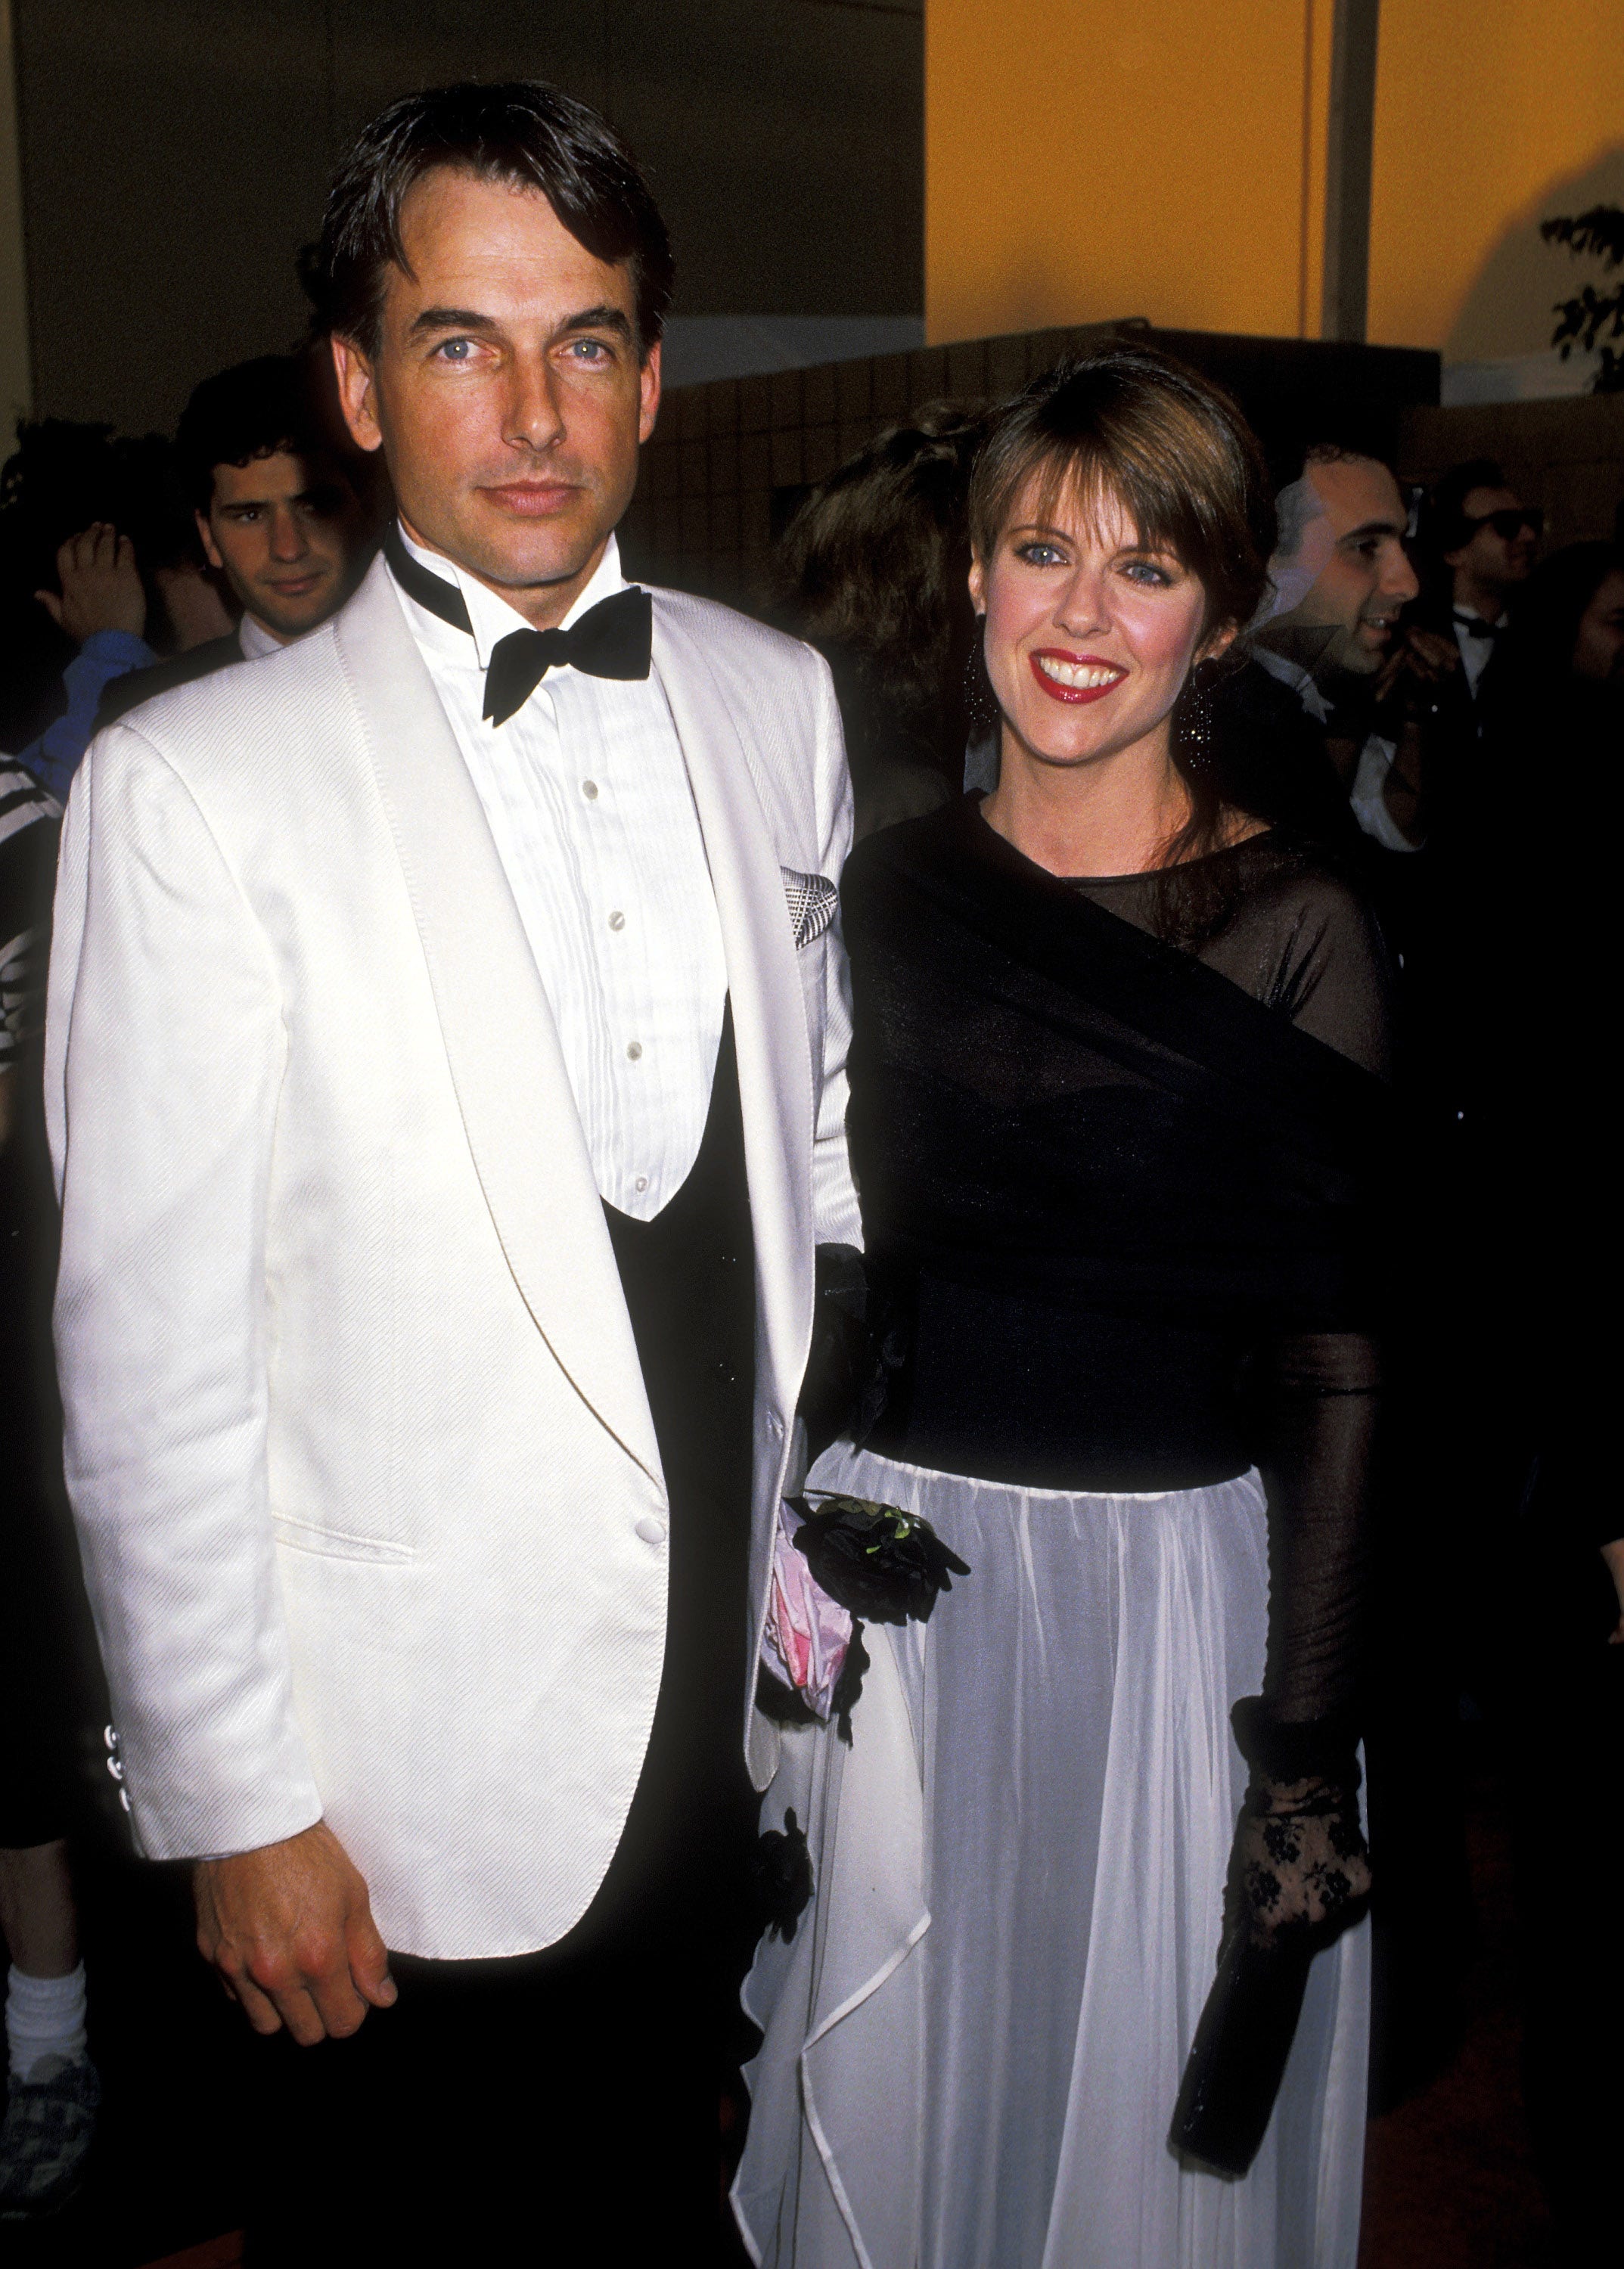 Mark Harmon and Pam Dawber have been married since 1987. (Ron Galella Collection via Getty Images)